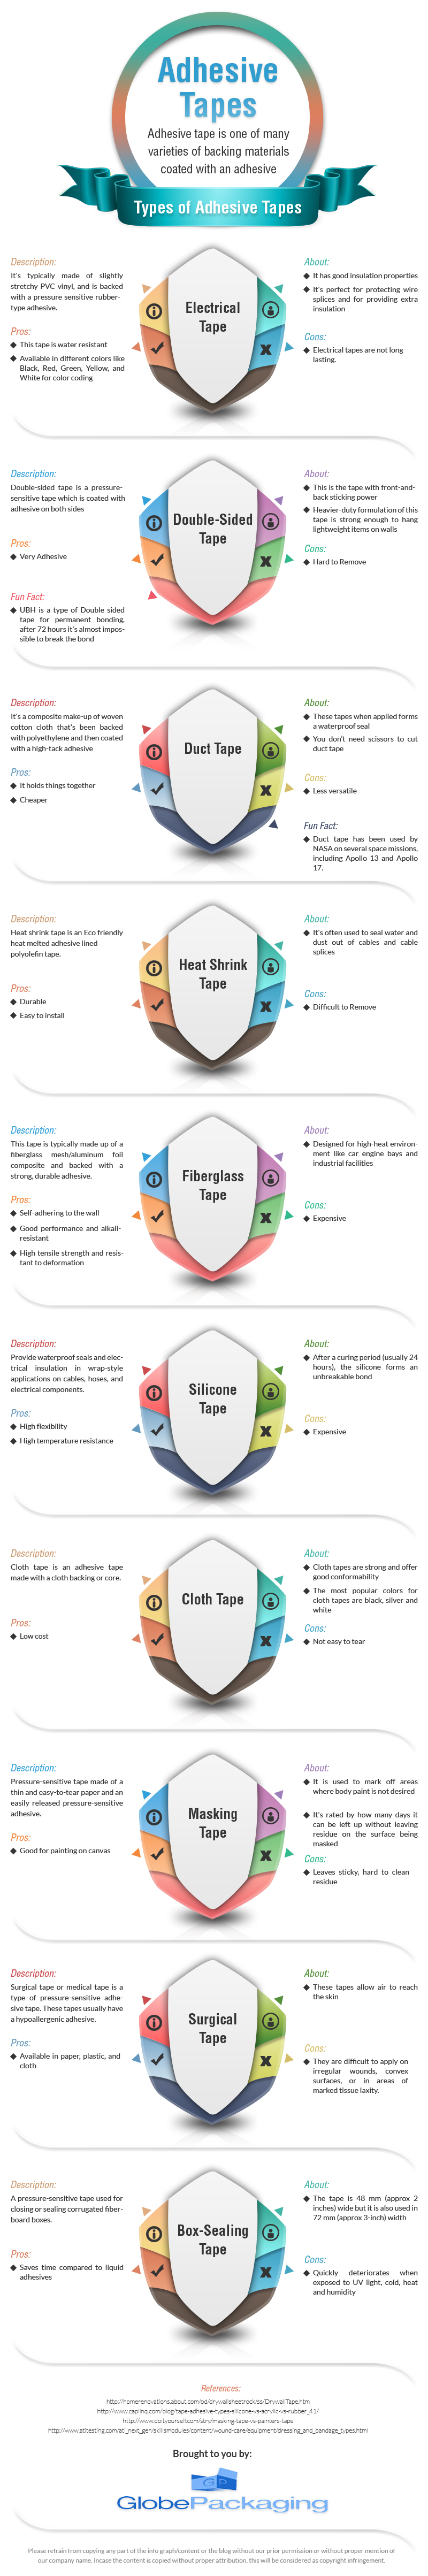 Types of Adhesive Tape by Globe Packaging